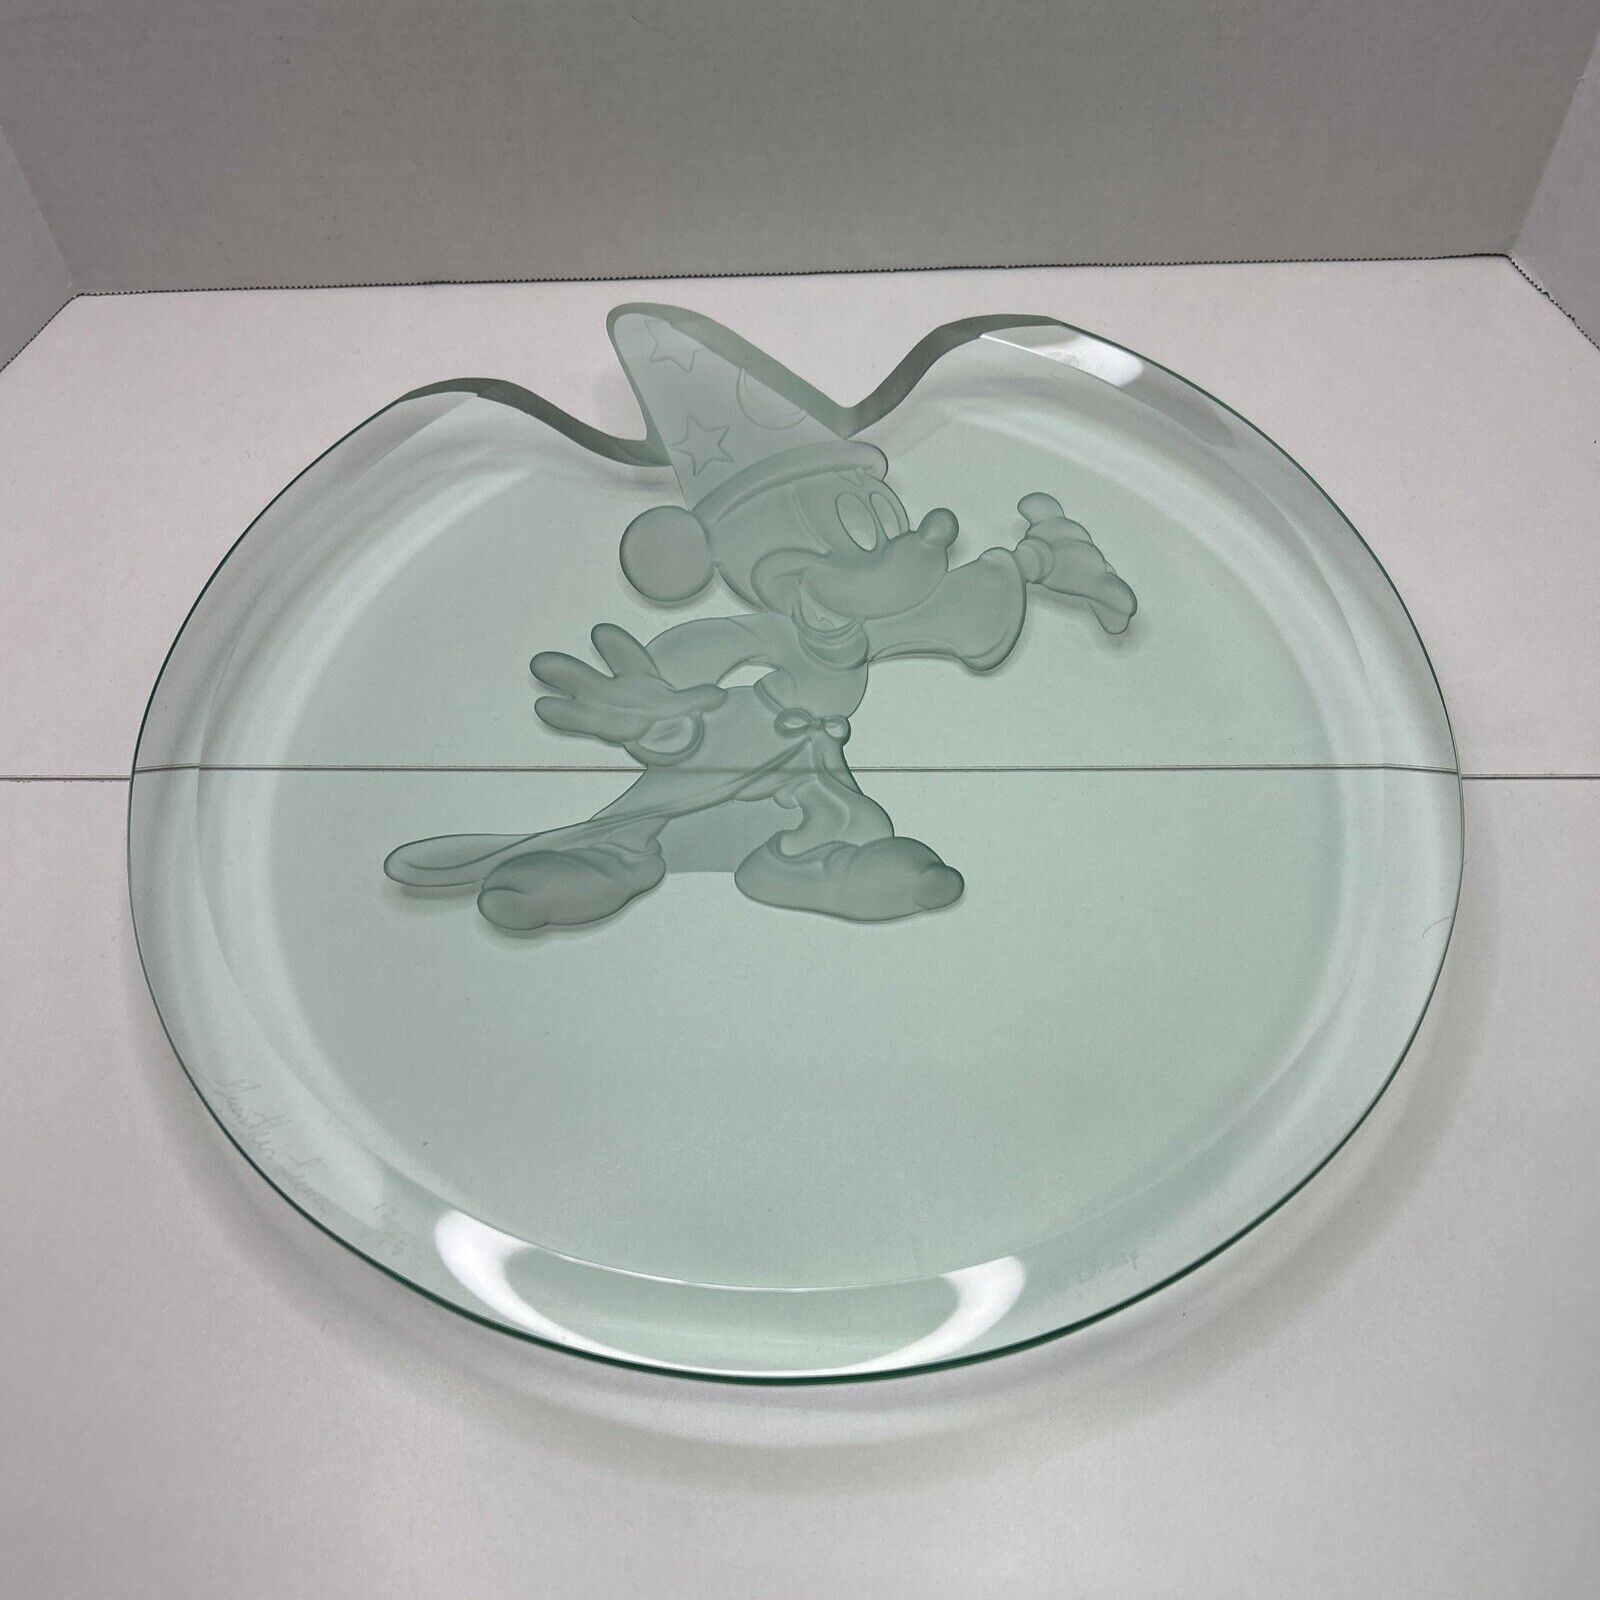 RARE Signed Guenther Luna Sorcerer Mickey Etched Crystal Glass Dish LE 17 Of 75